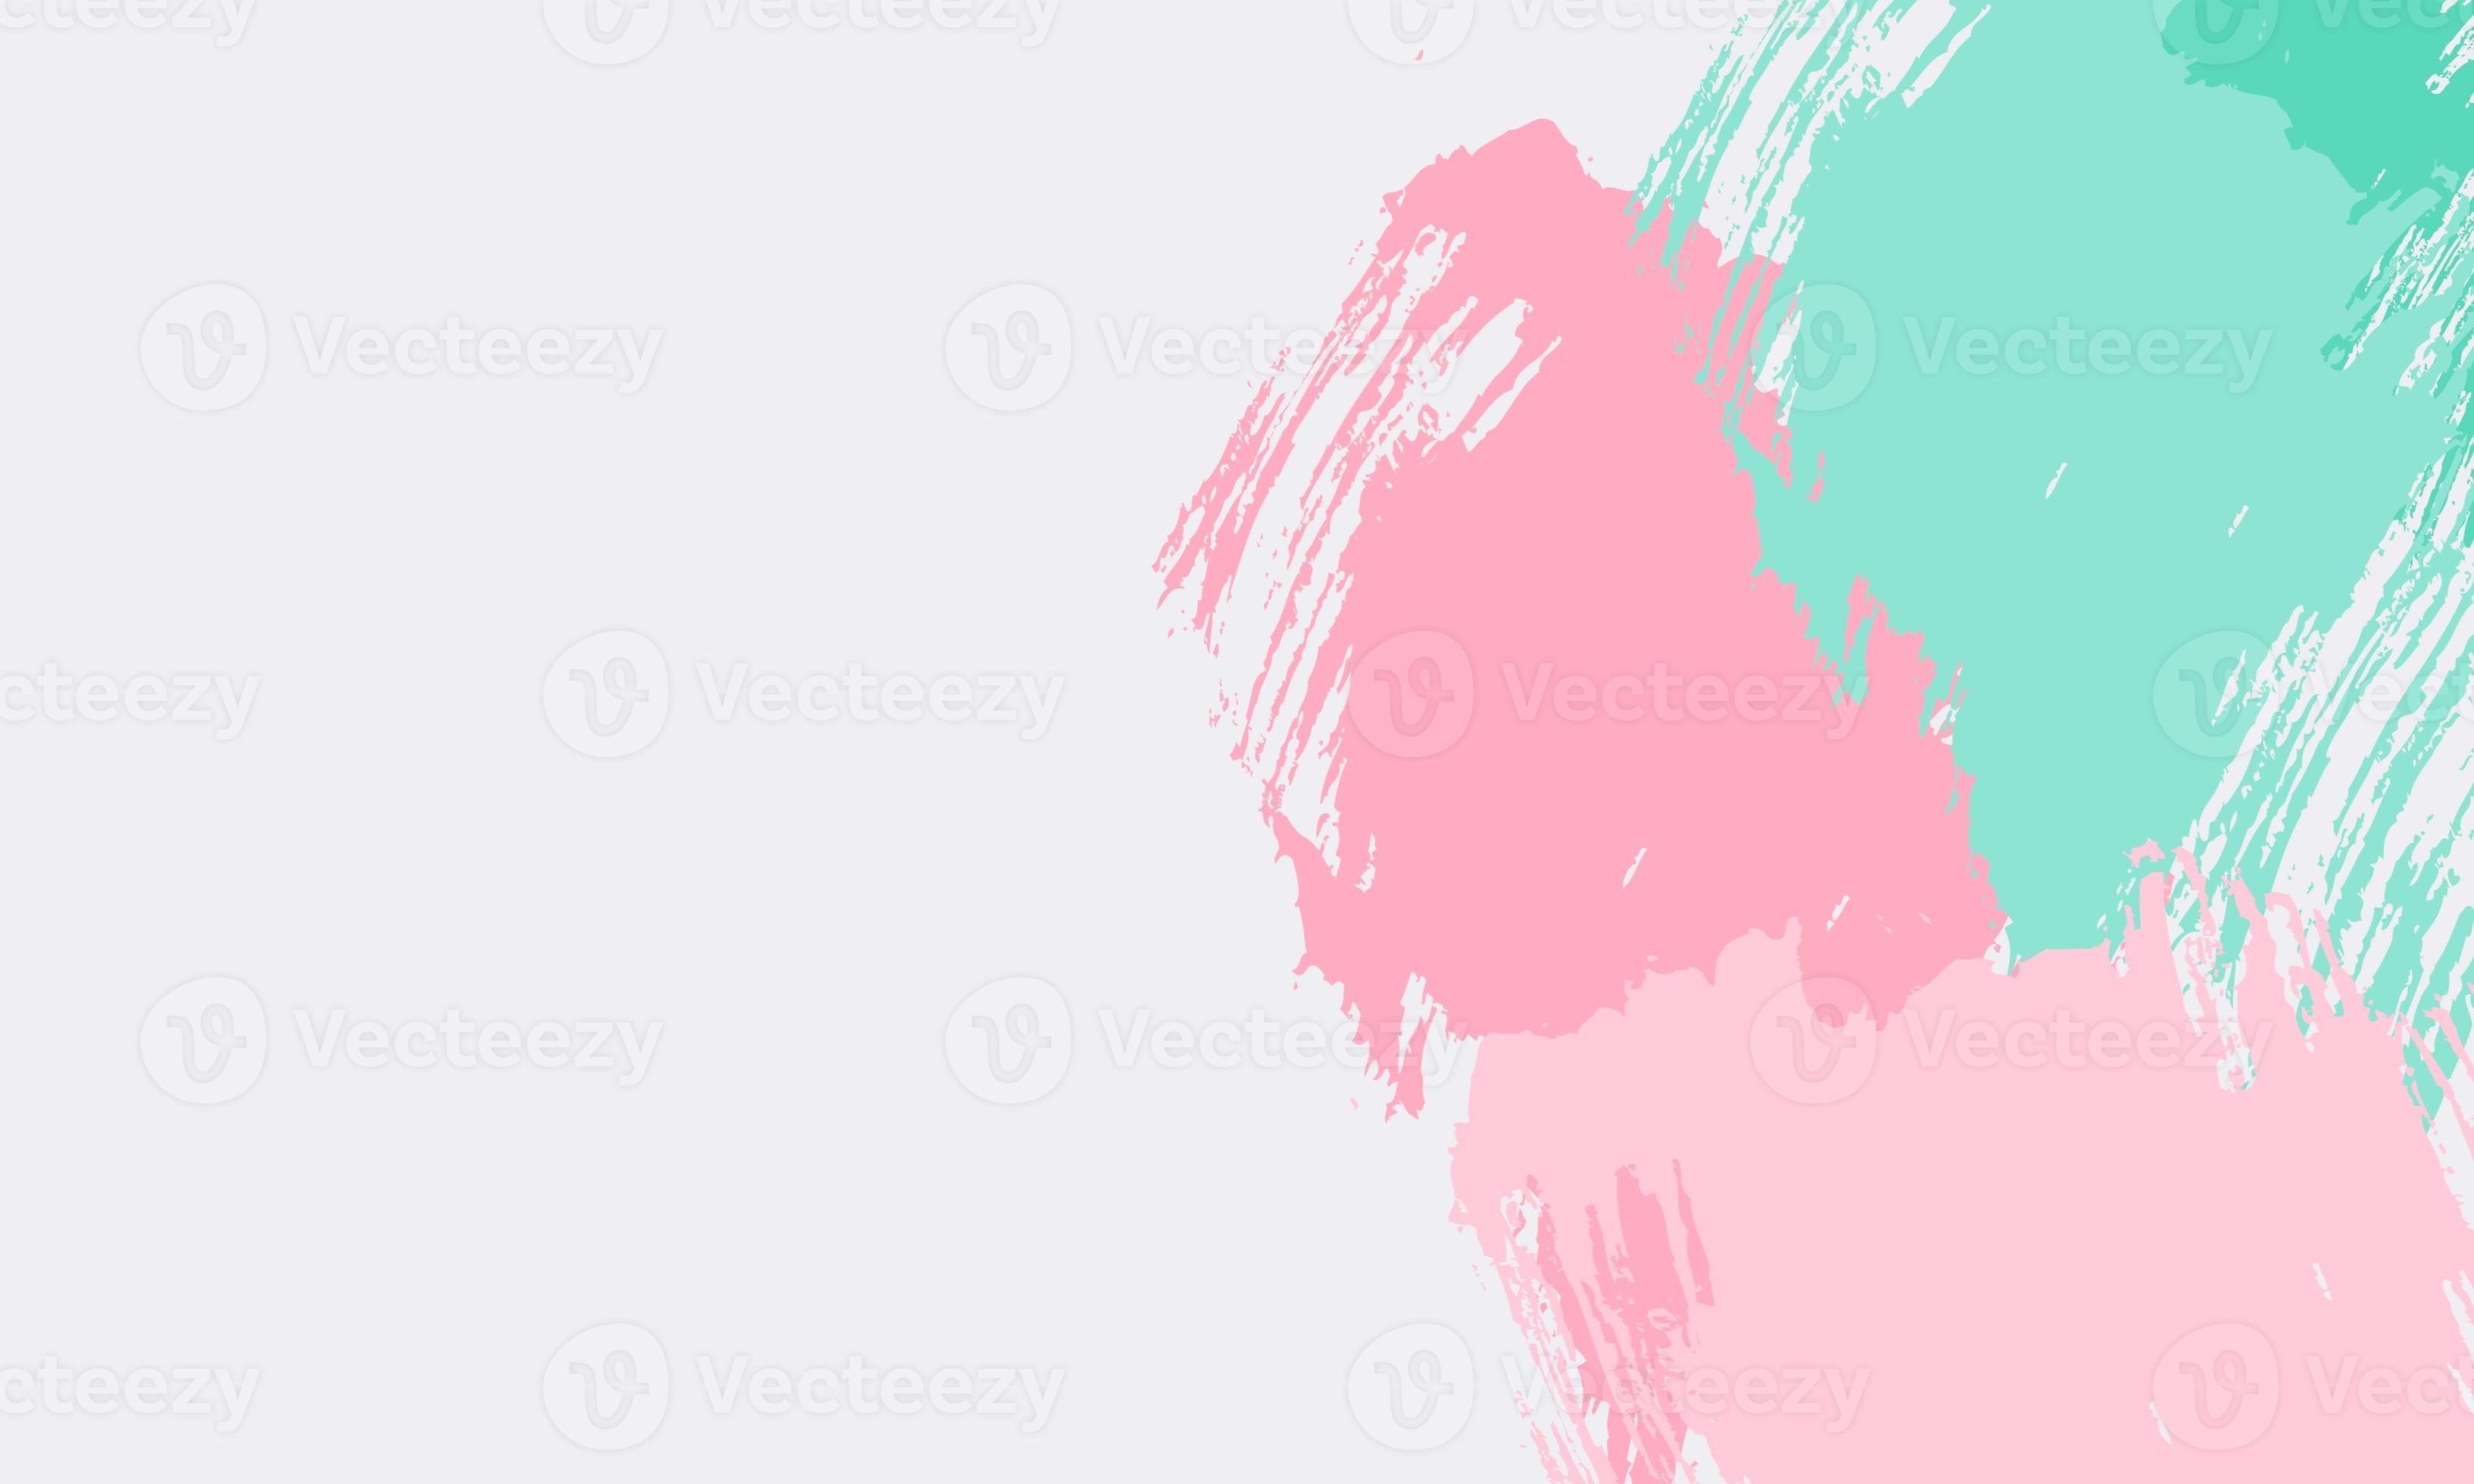 Pastel pink and blue brush strokes on a white background photo - Desktop, computer